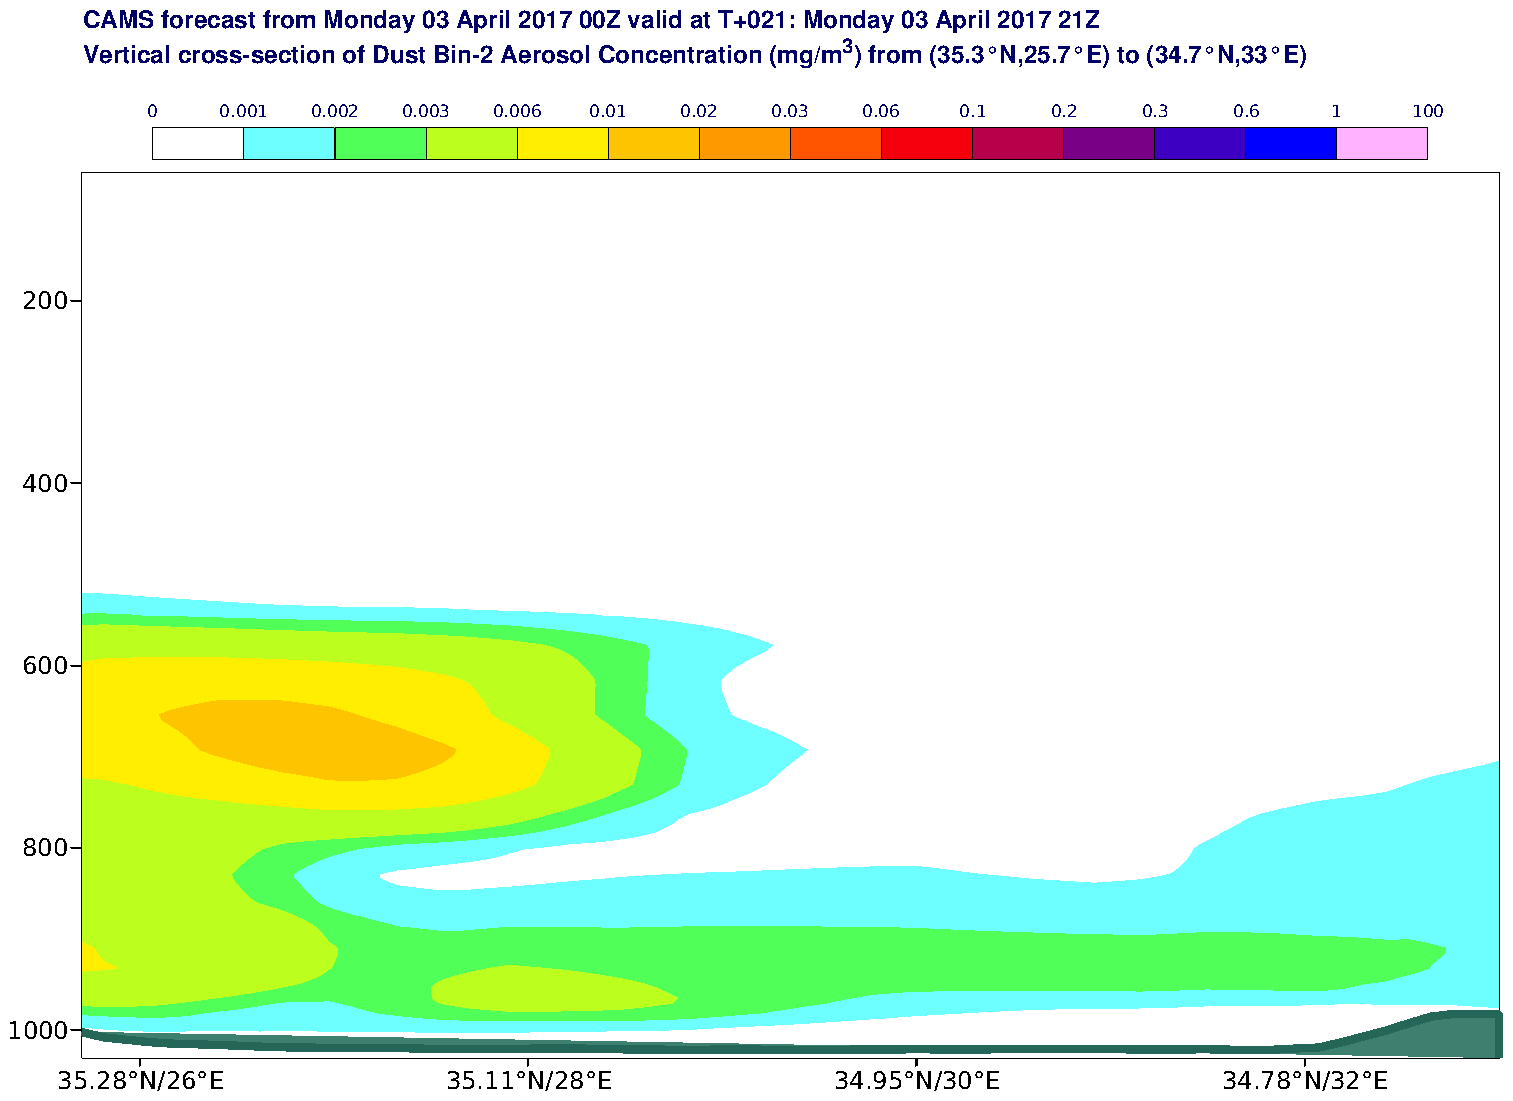 Vertical cross-section of Dust Bin-2 Aerosol Concentration (mg/m3) valid at T21 - 2017-04-03 21:00